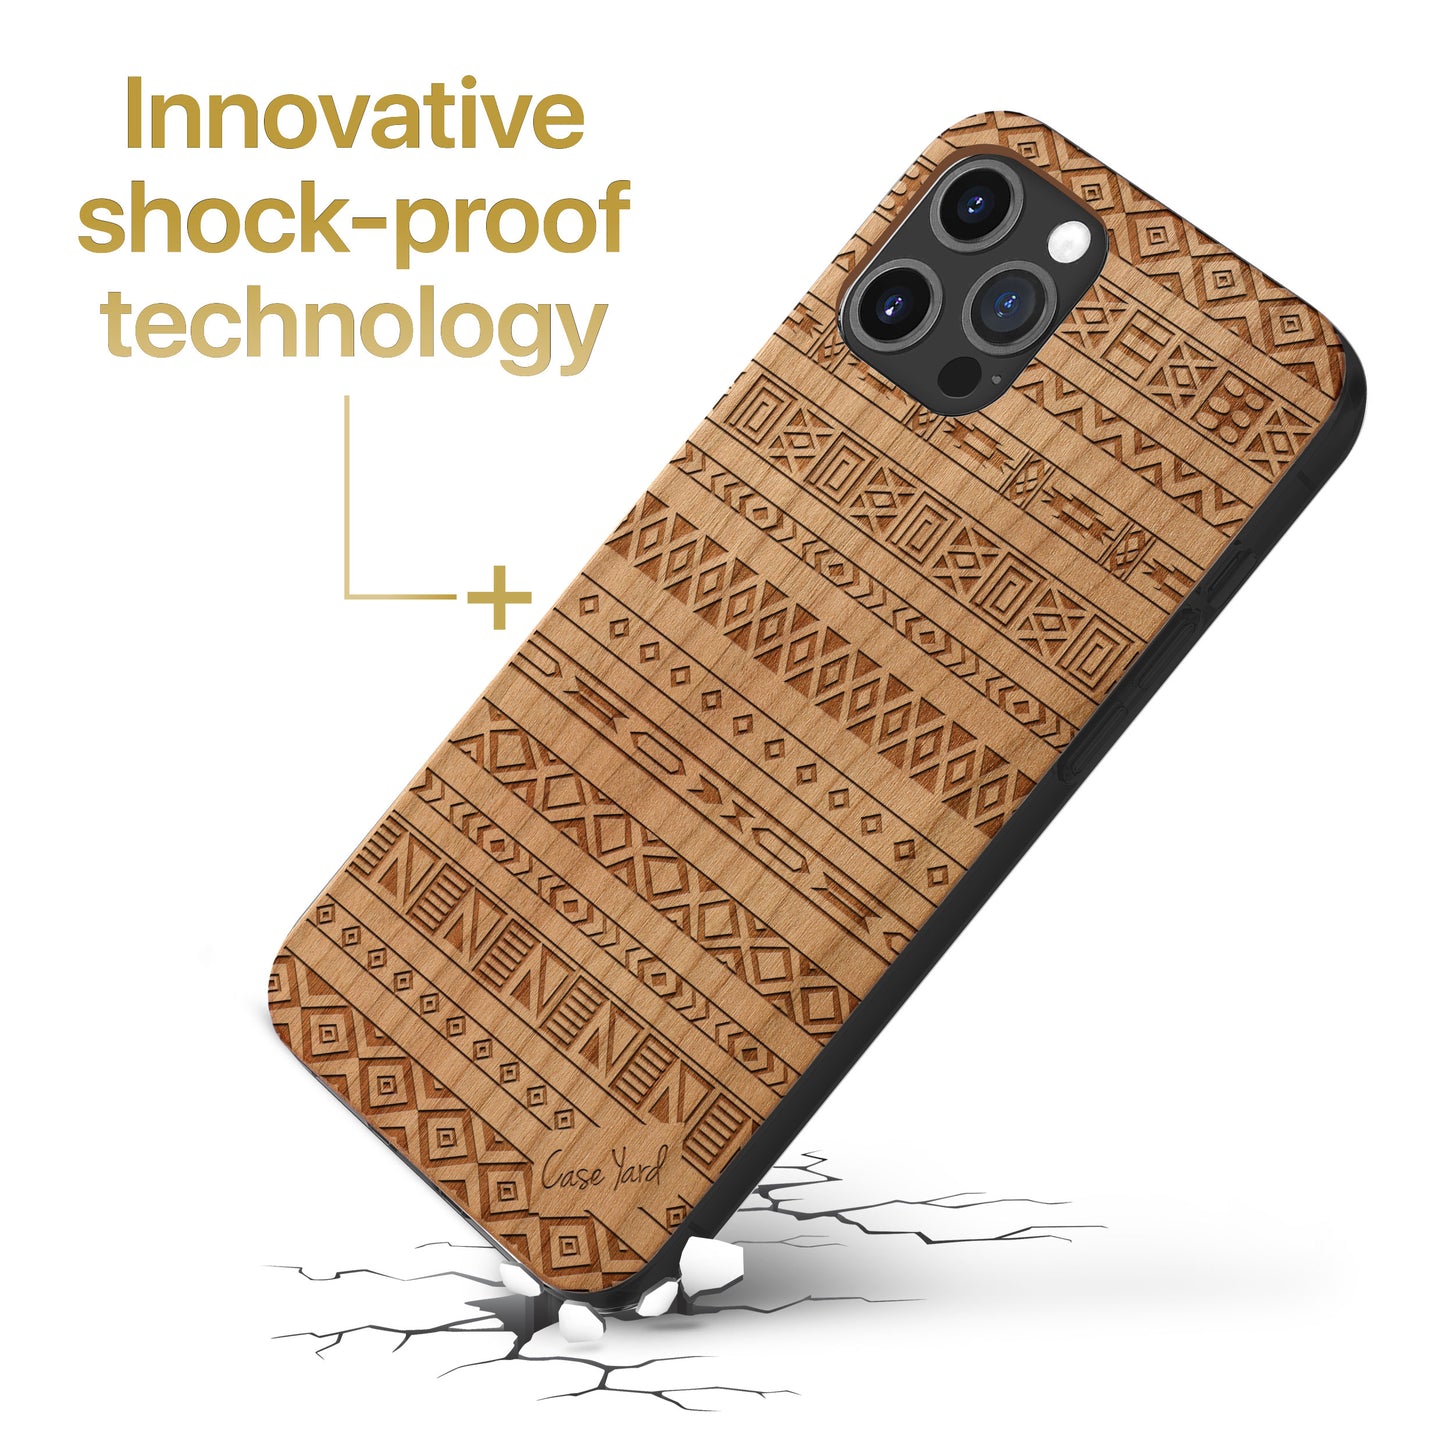 Wooden Cell Phone Case Cover, Laser Engraved case for iPhone & Samsung phone Aztec Pattern Design